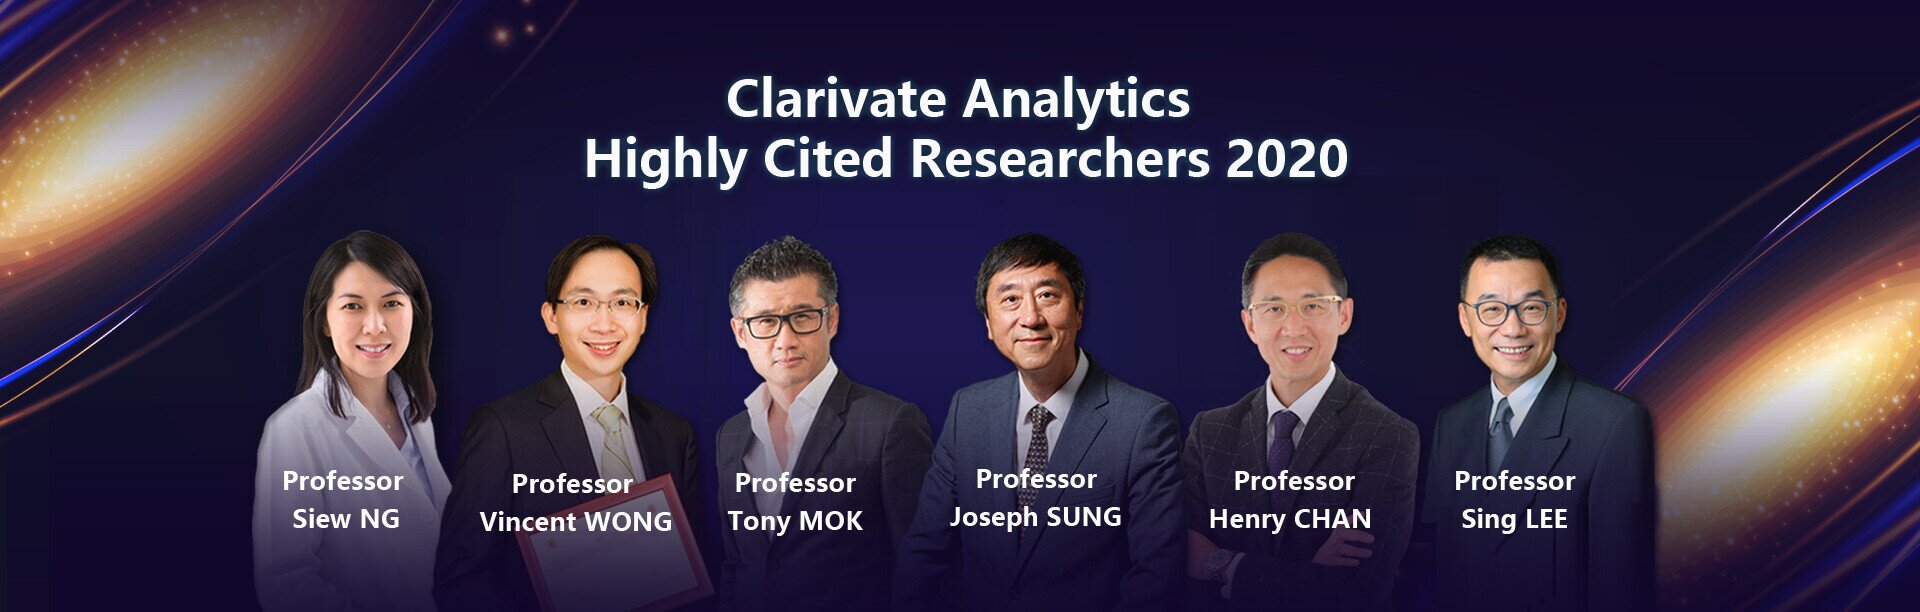 Clarivate Analytics Highly Cited Researchers 2020